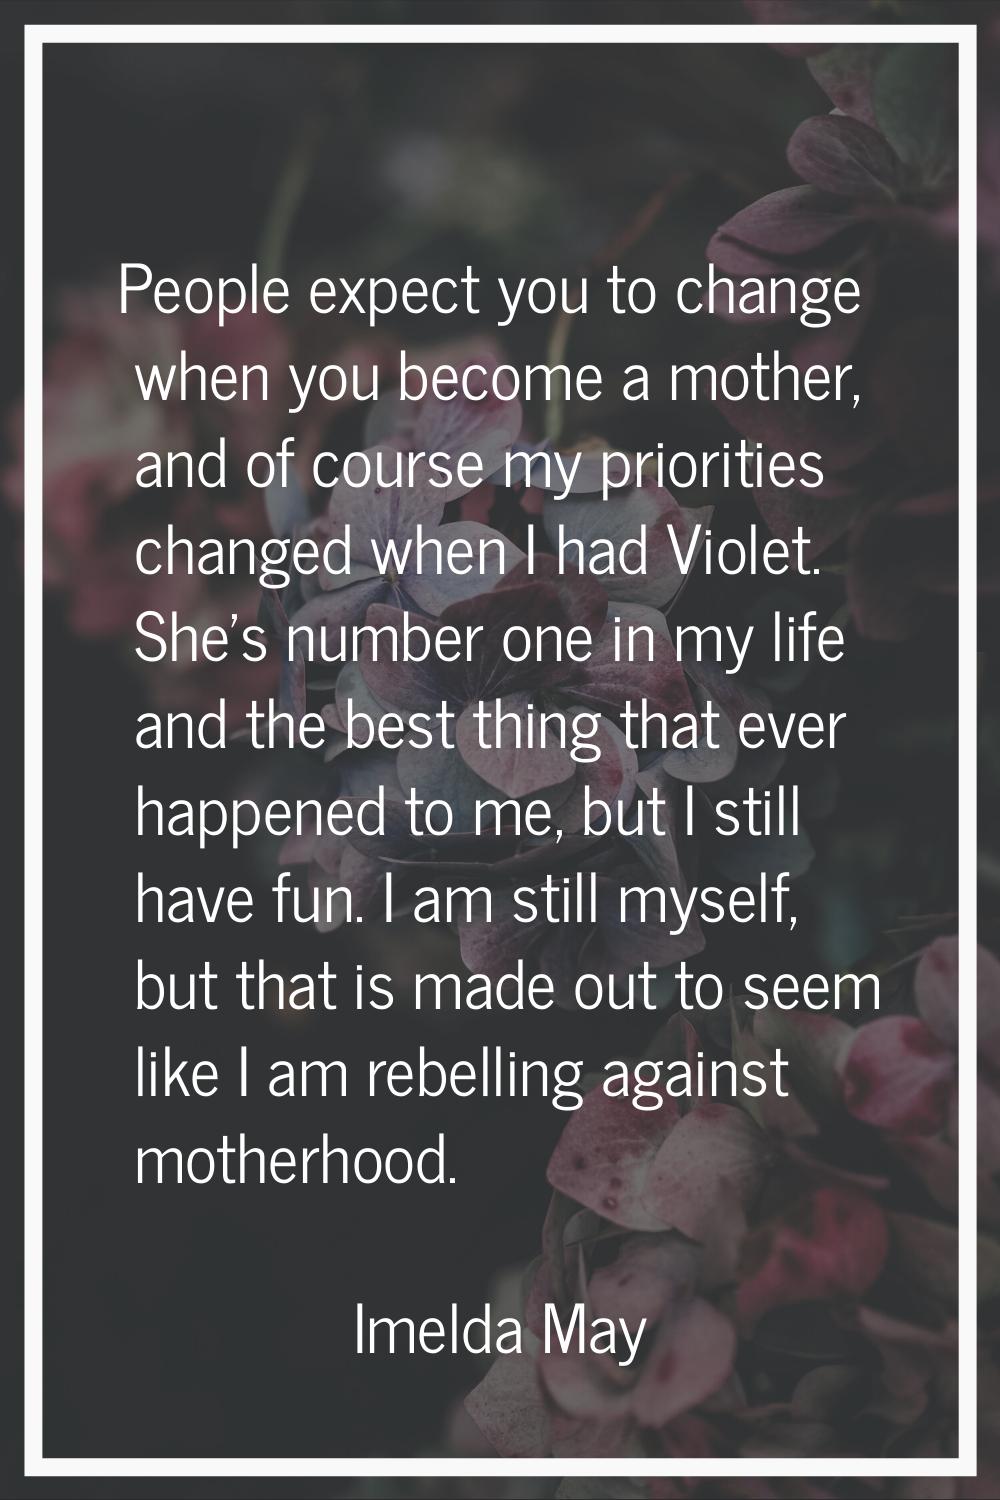 People expect you to change when you become a mother, and of course my priorities changed when I ha